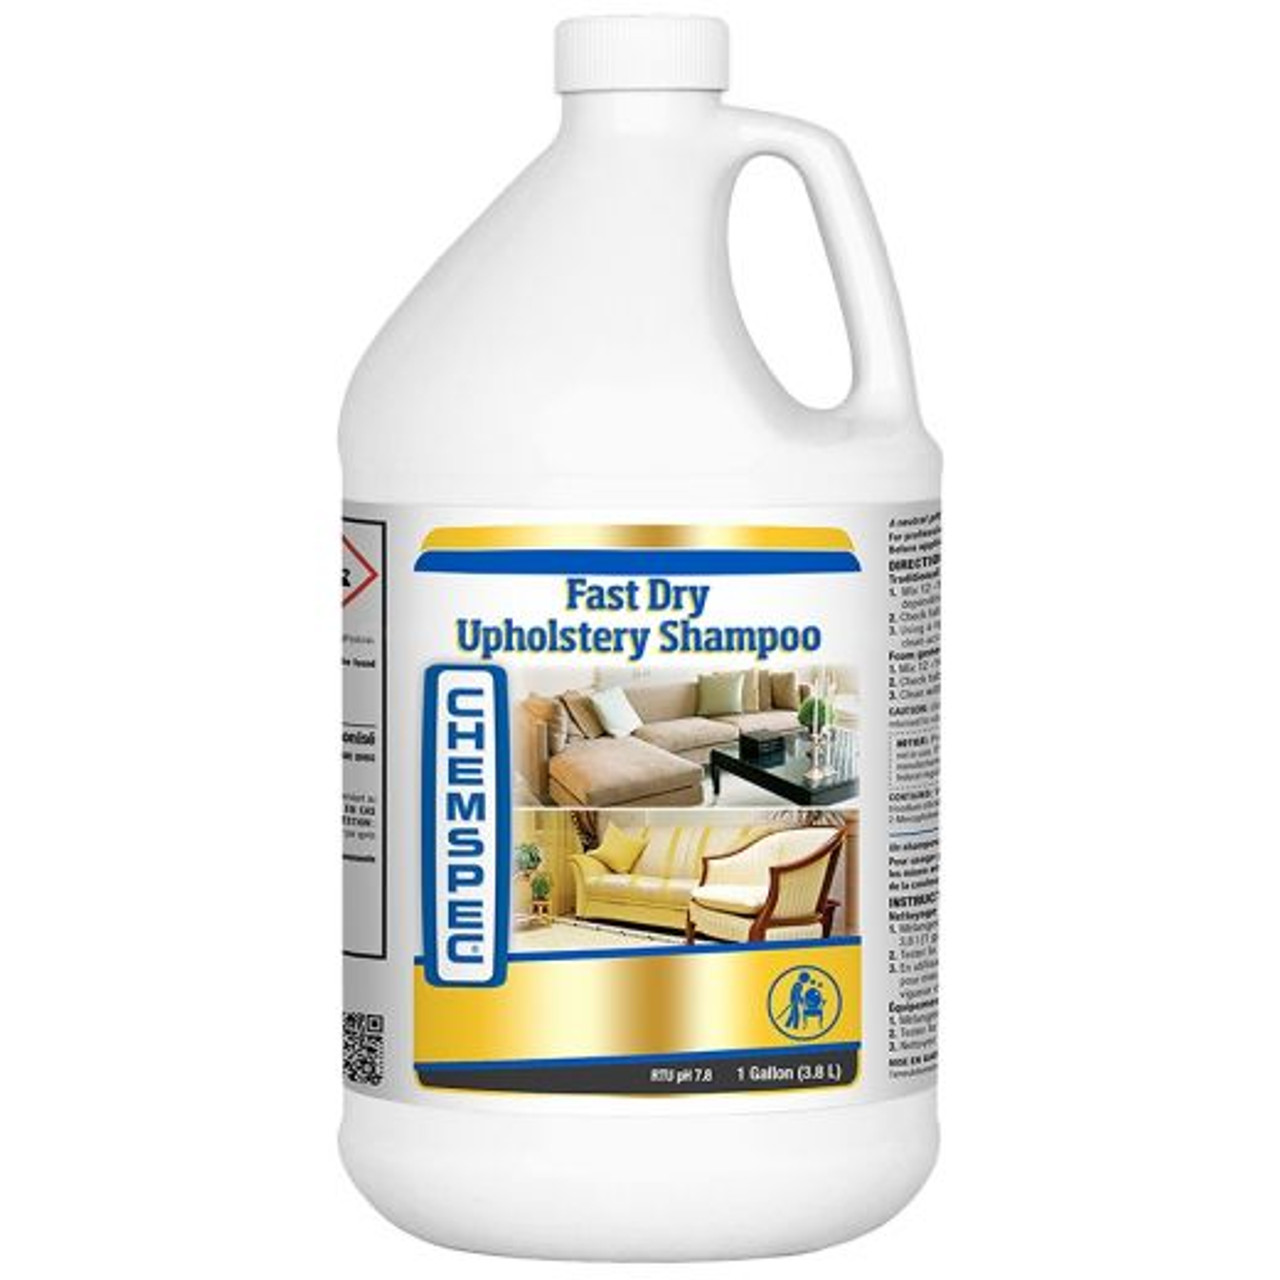 Chemspec Fast Dry Upholstery Shampoo CASE of 4 gal.